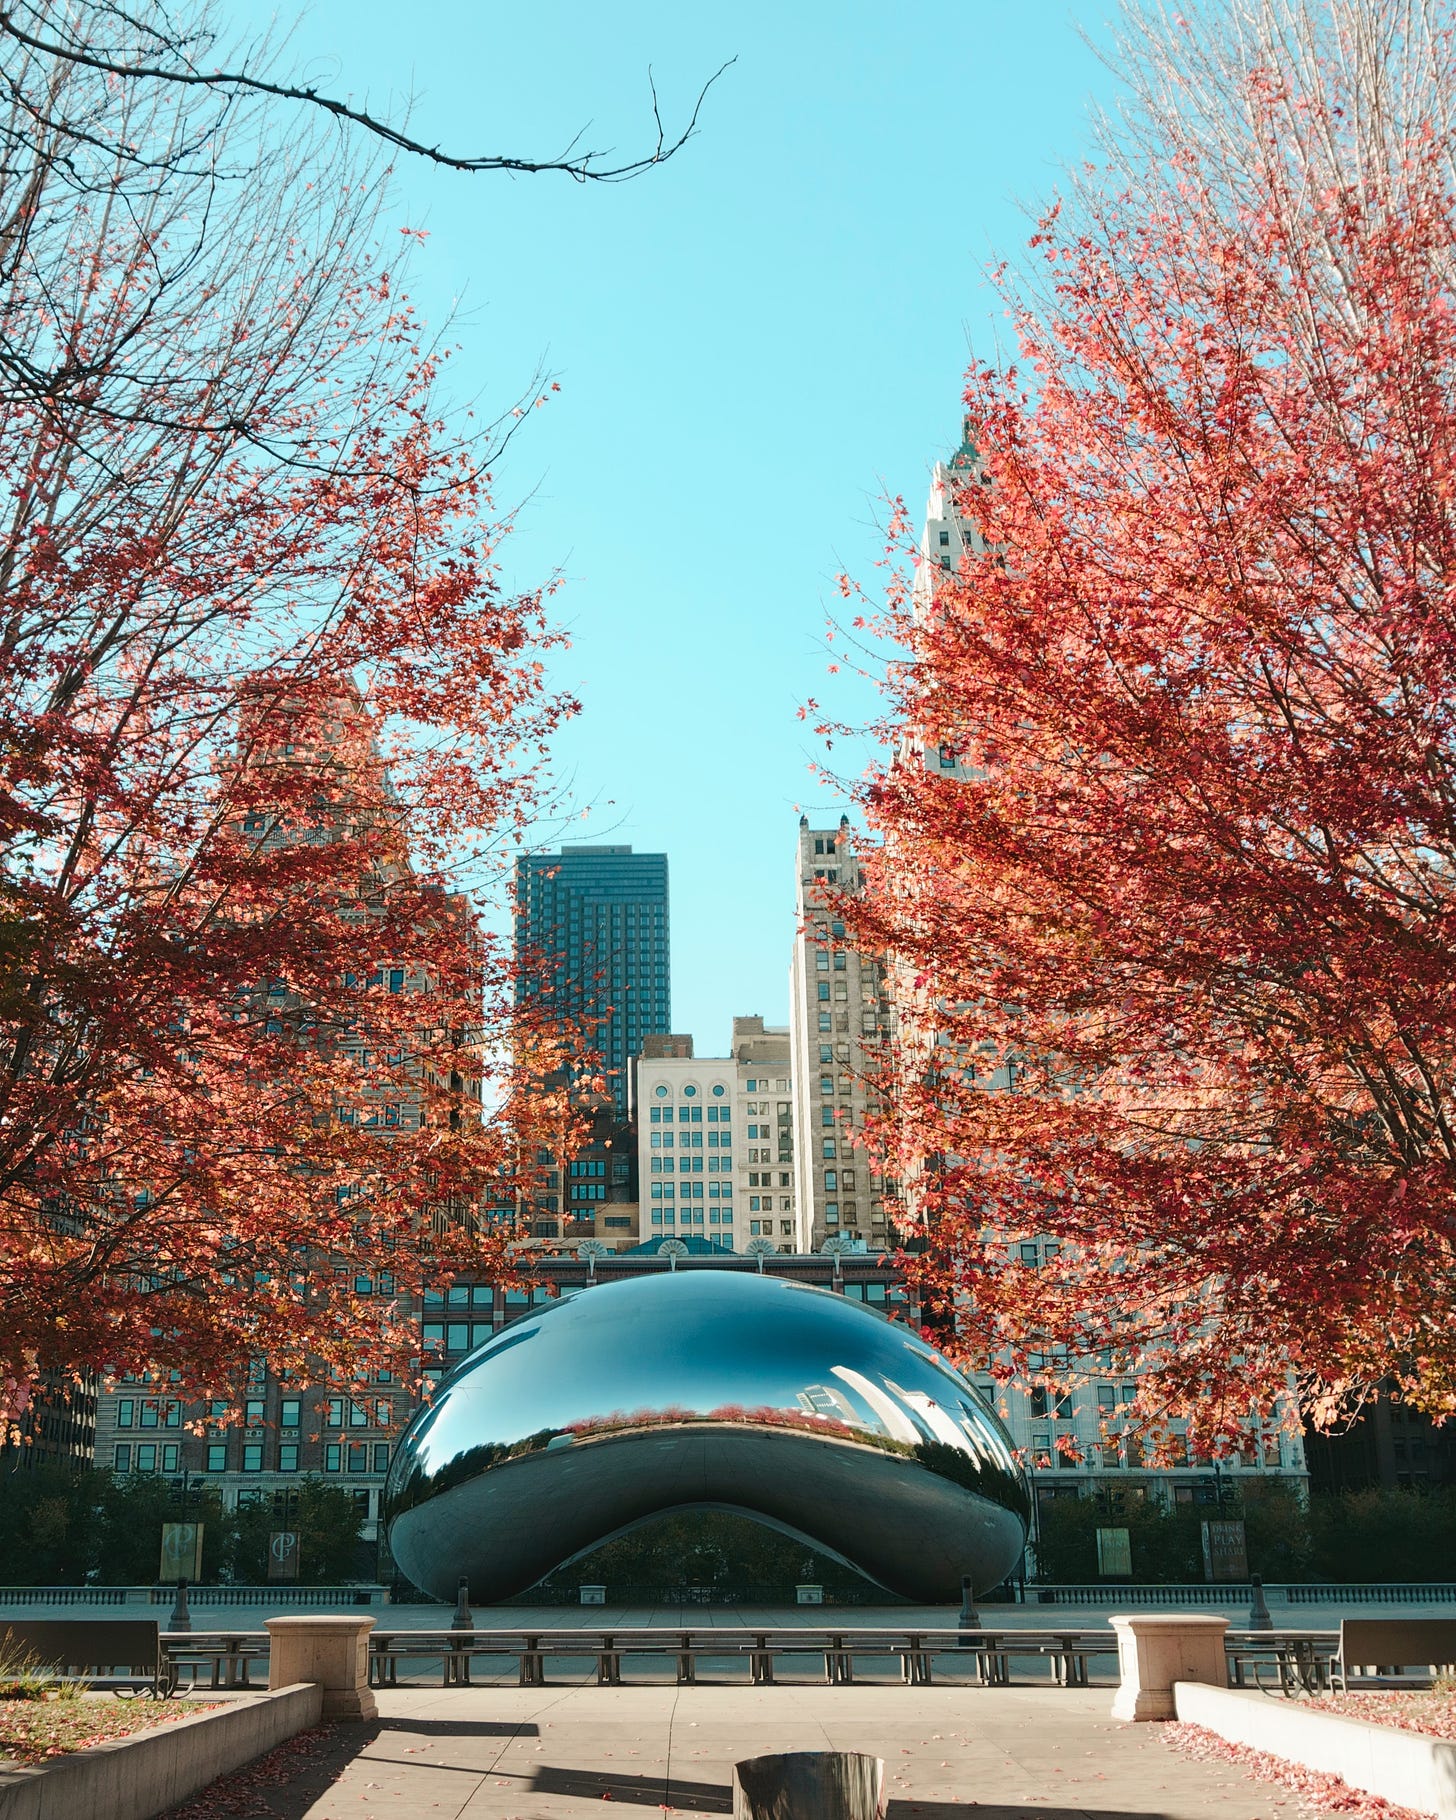 Image of relfective statue of the "bean" in downtown Chicago, Ill. Free image from Upsplash